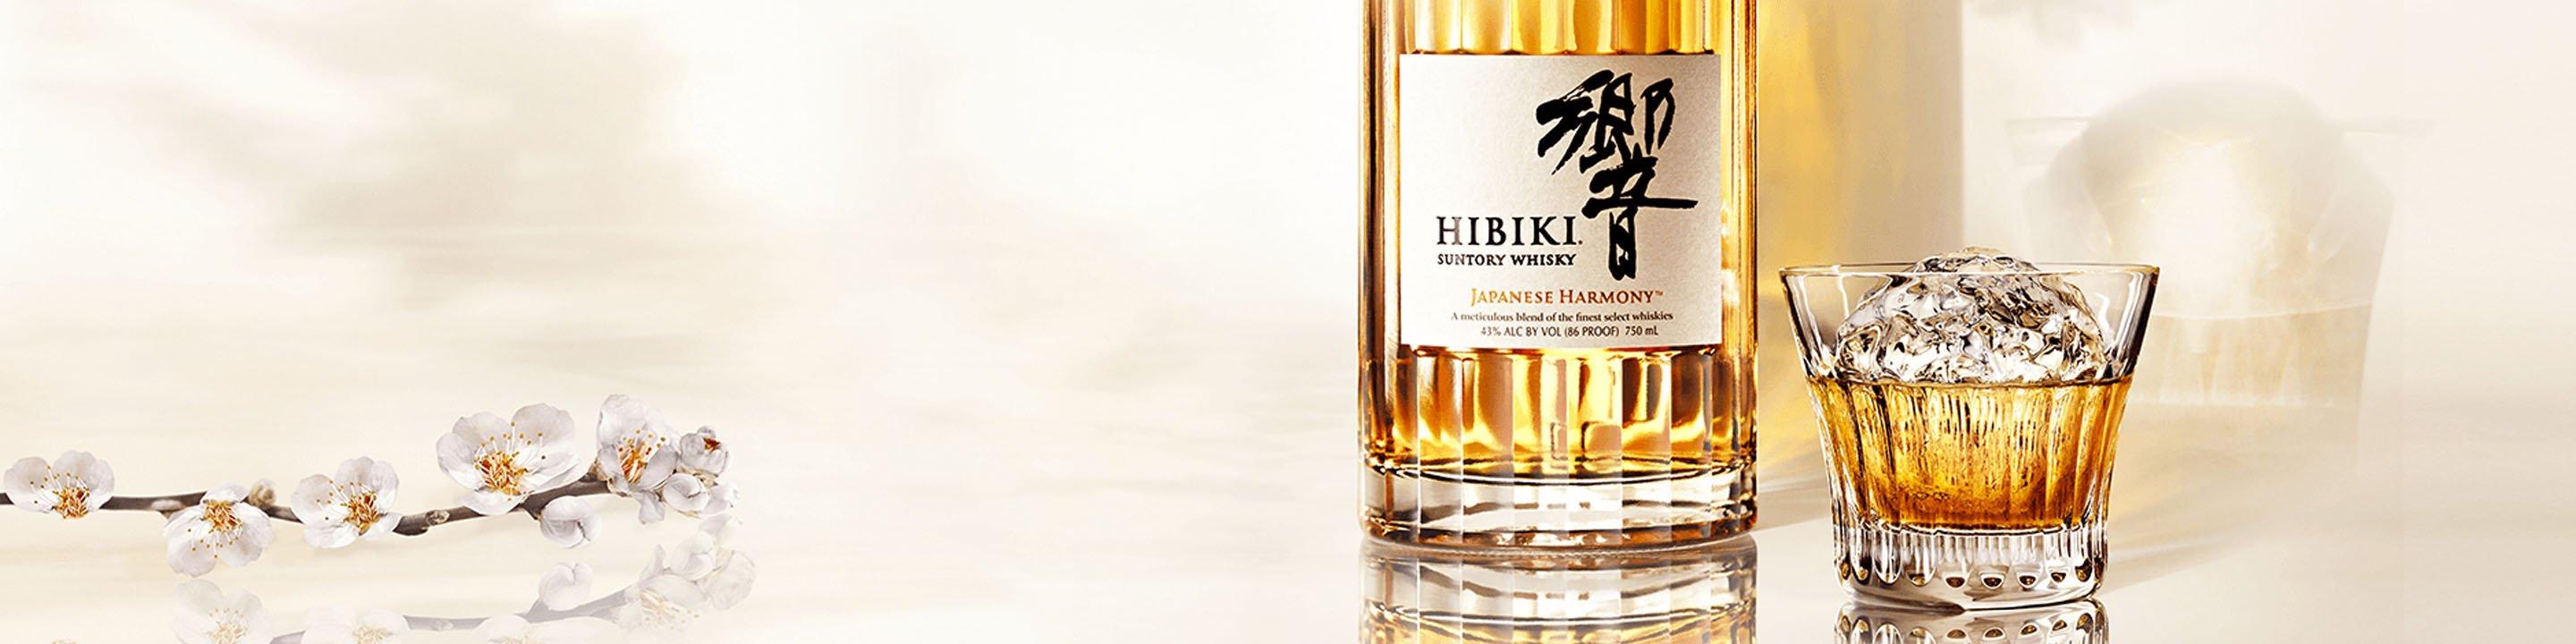 Hibiki Whisky celebrates an unrivaled art of blending, fine craftsmanship and a sense of luxury from the House of Suntory. Whether enjoyed neat, on the rocks, blended with water or mixed as a cocktail, the harmony of this blend remains complete.

Buy Hibiki online now from nearby liquor stores via Minibar Delivery.